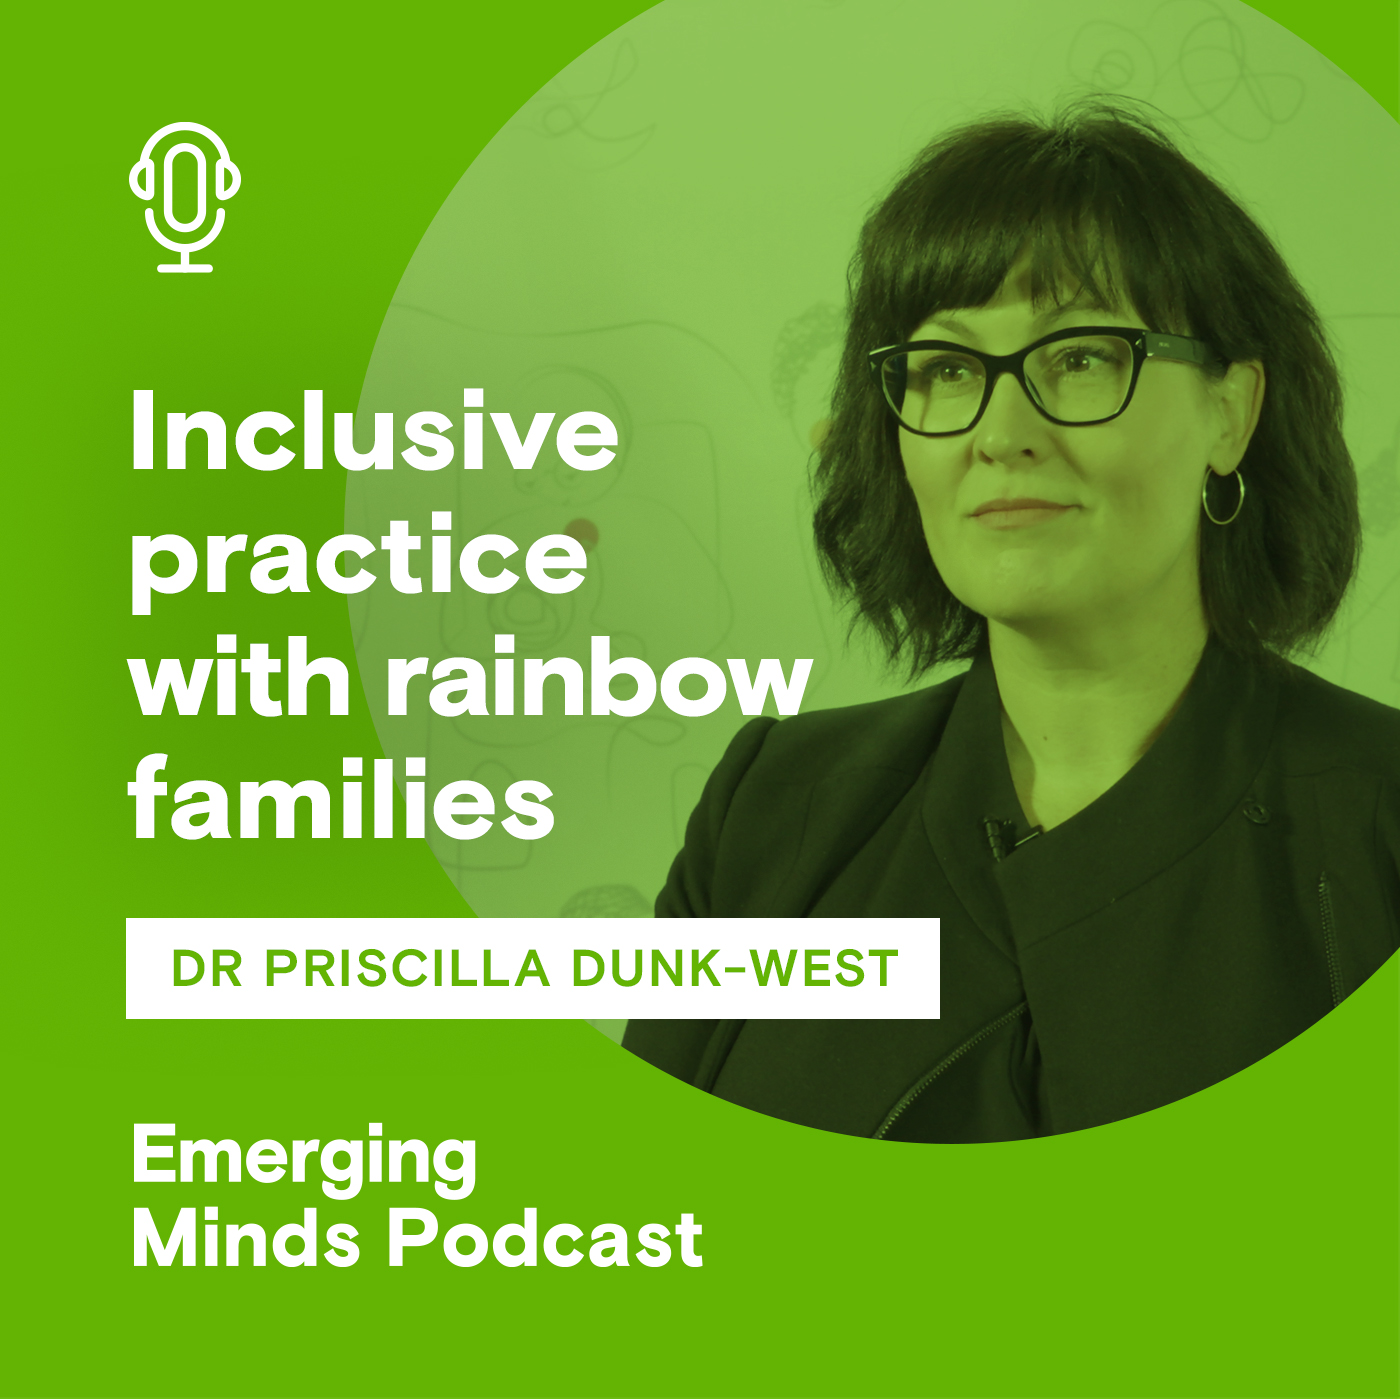 Re-release: Inclusive practice with rainbow families